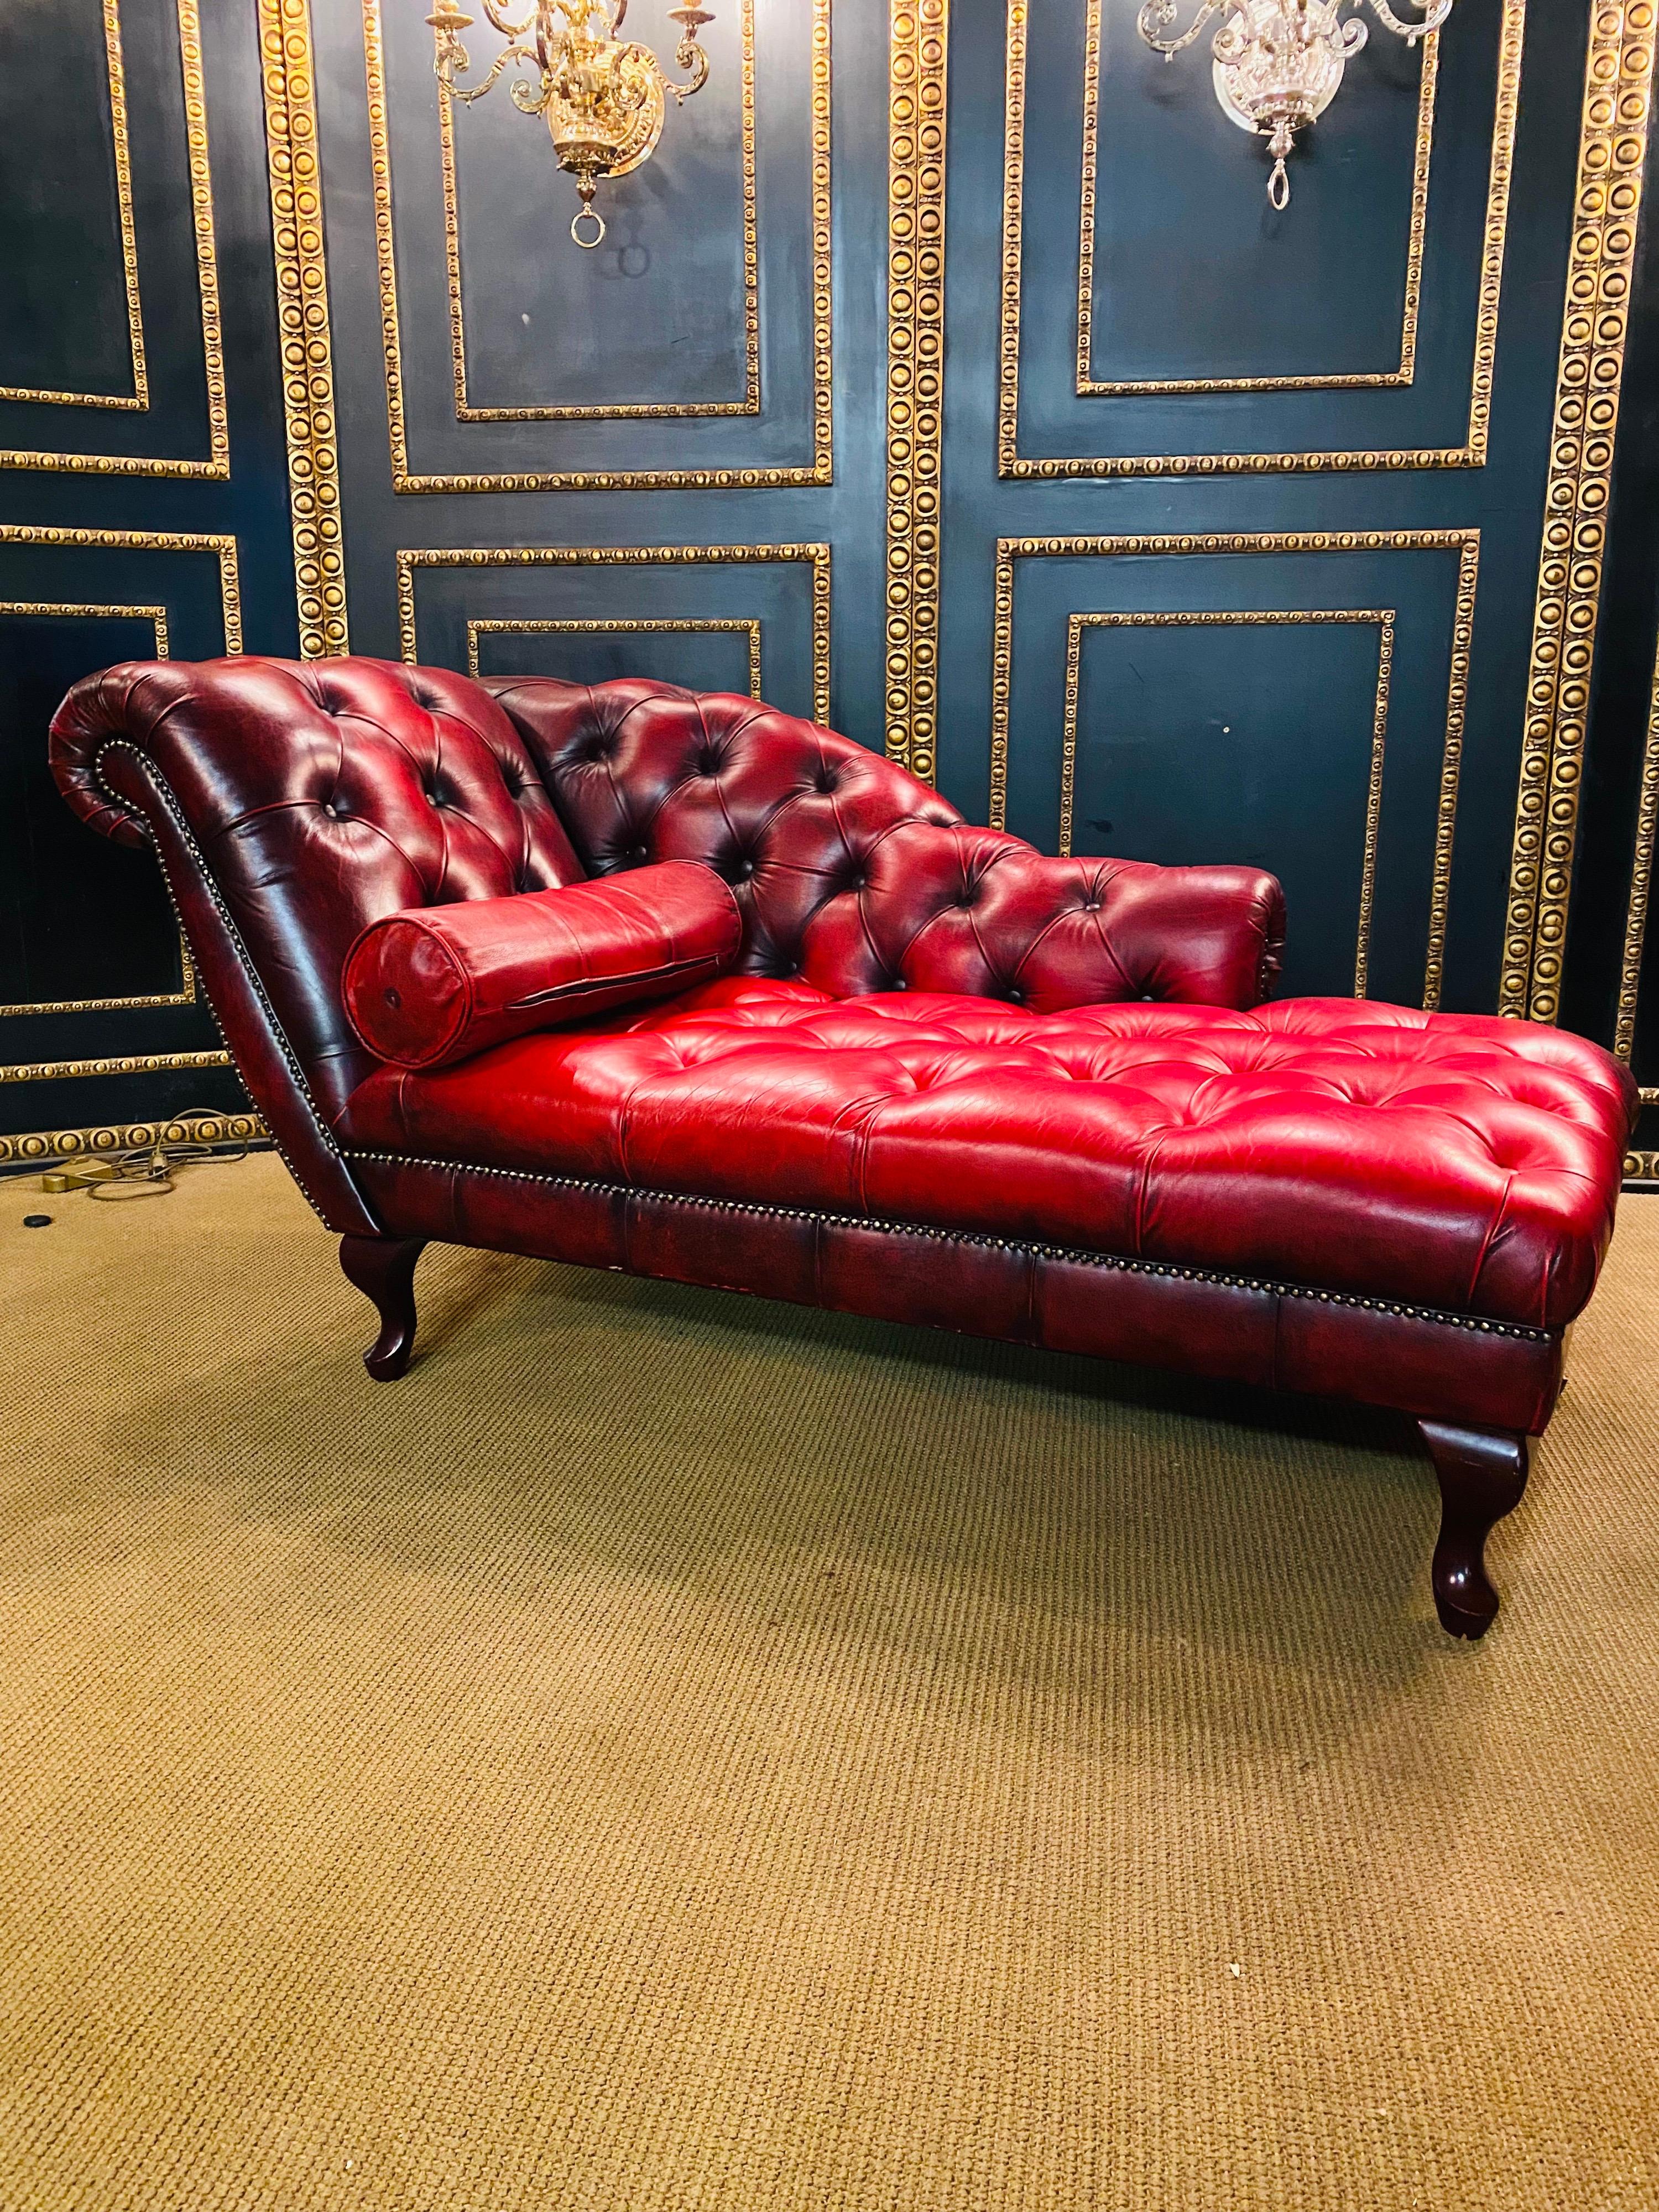 We are delighted to offer for sale this lovely tufted hand dyed Red leather Chesterfield chaise lounge daybed

A very good looking well made and exceptionally comfortable piece. This chaise is then been hand dyed this stunning rich warm Red